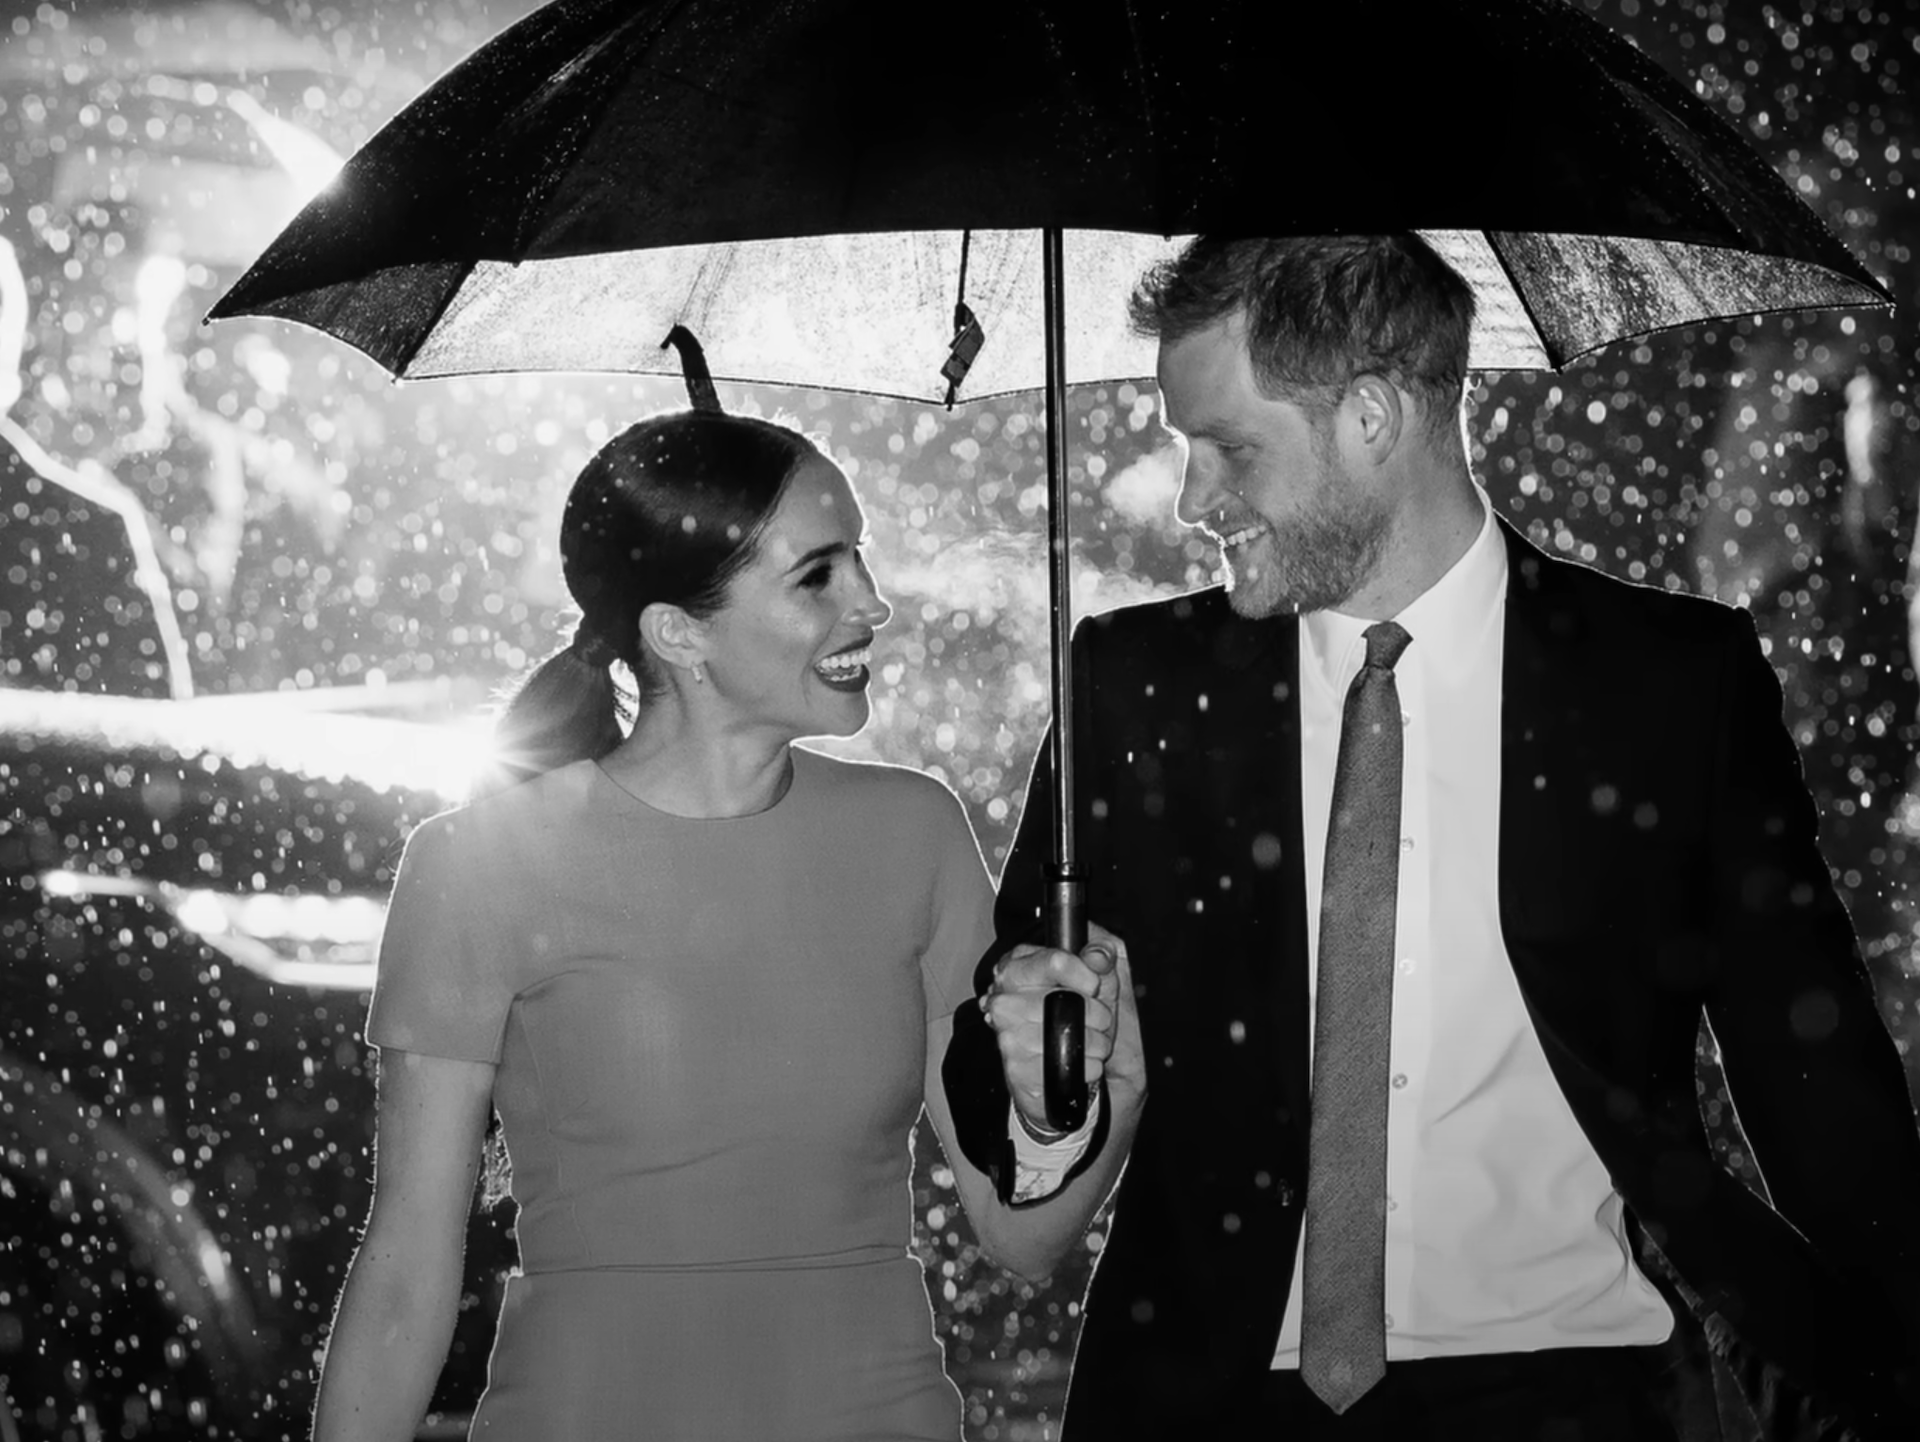 The Duke and Duchess of Sussex are bringing their story to Netflix. An official teaser for their docuseries, 'Harry & Meghan' was released Thursday.